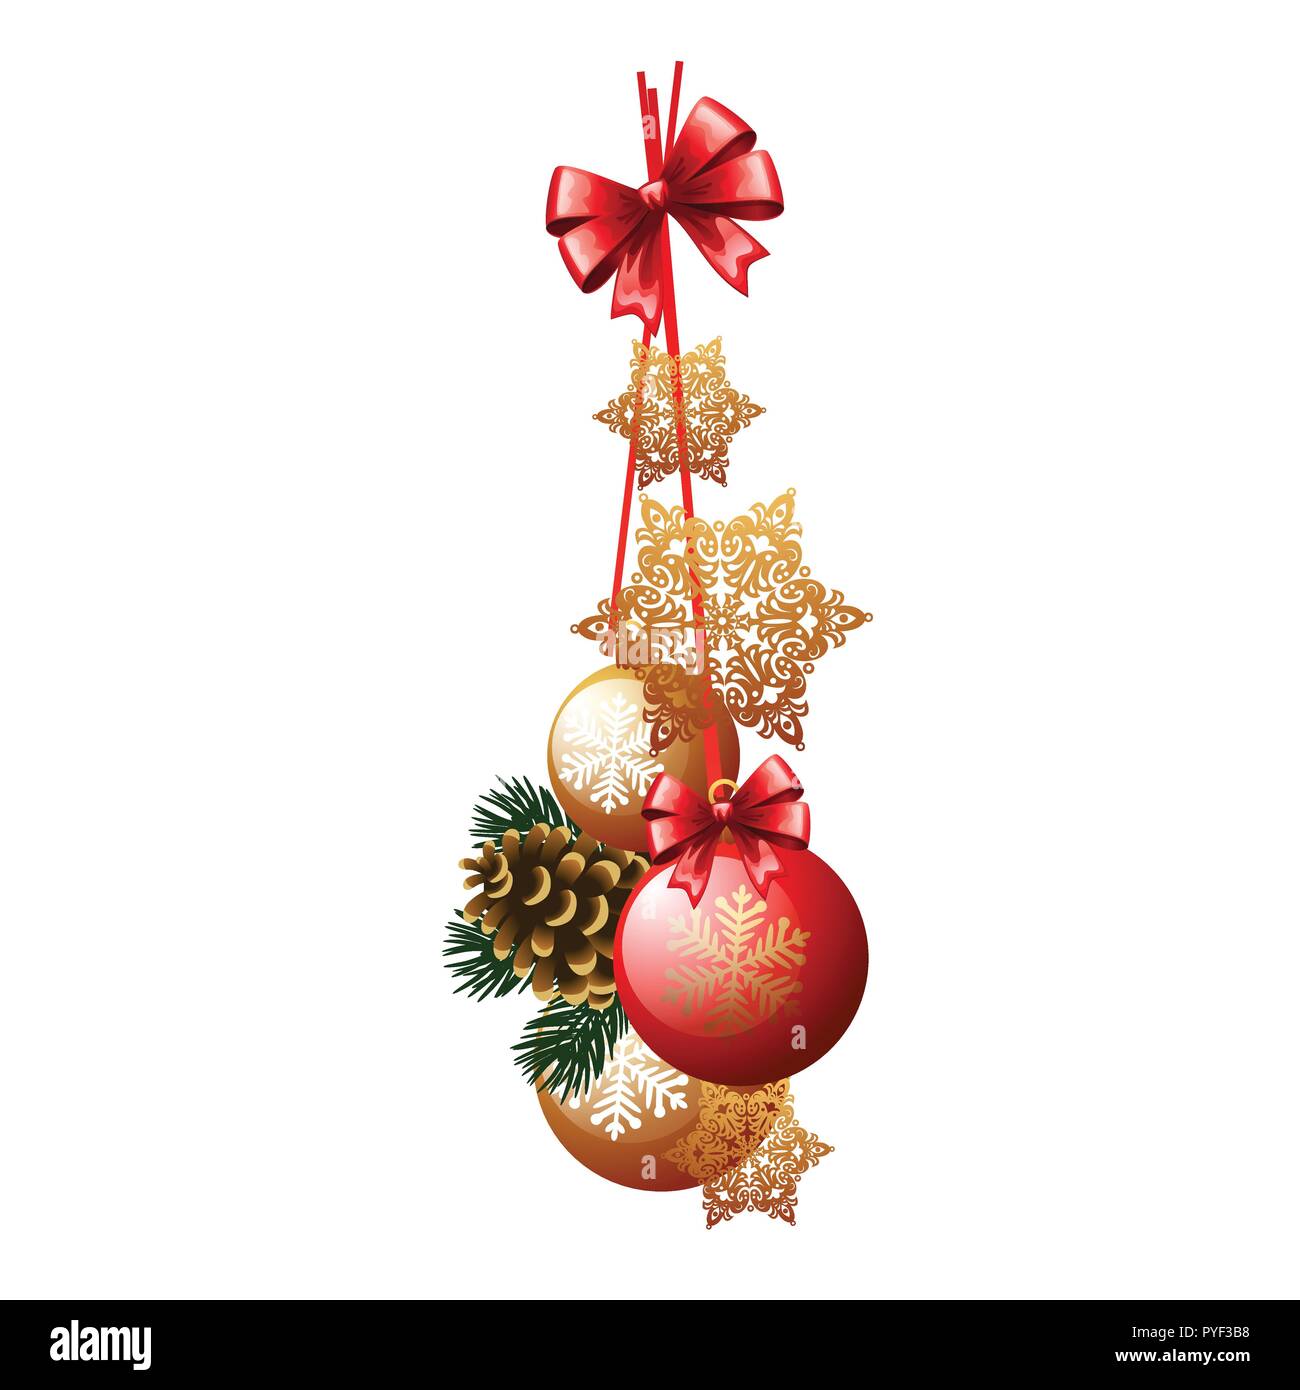 Christmas decoration in the form of a bundle red and golden glass balls and baubles isolated on white background. Design of Christmas gift with snowflakes and red ribbon bow. Vector illustration. Stock Vector